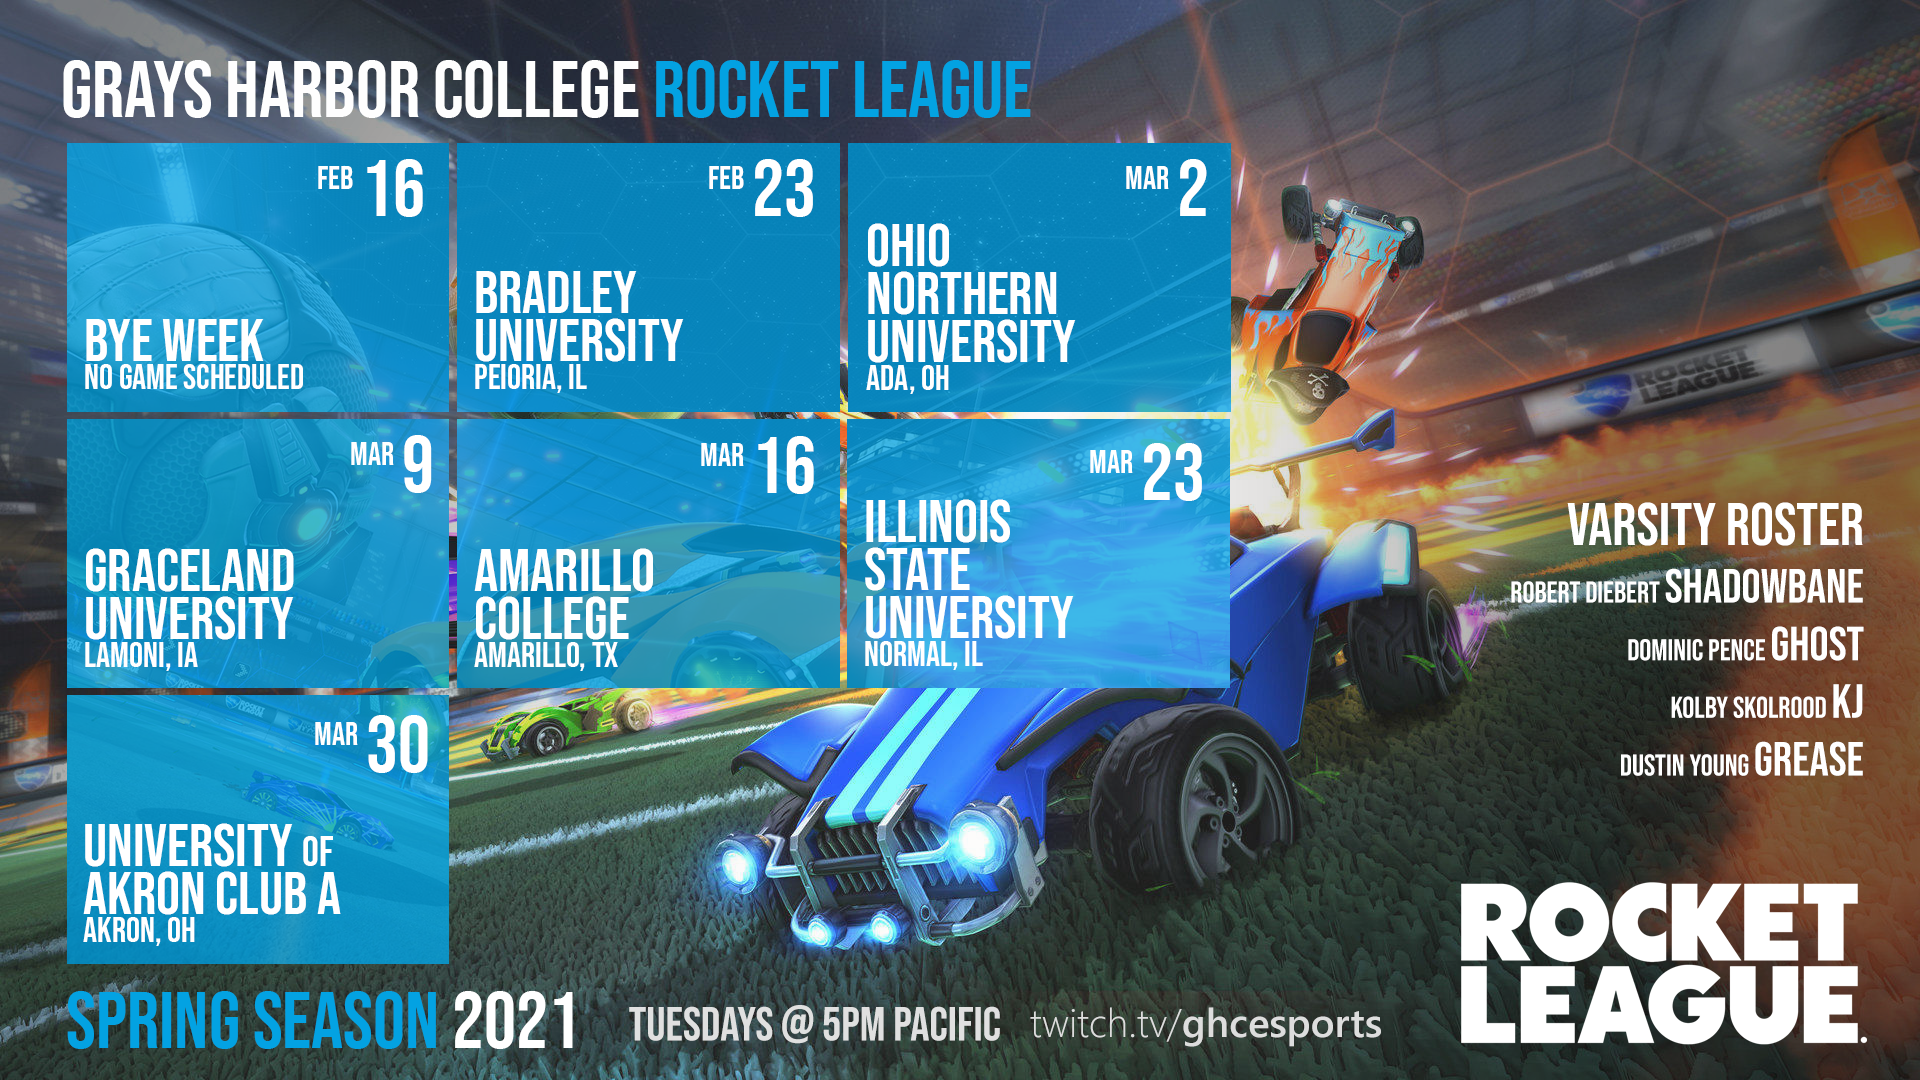 A schedule of Rocket League games listed below in text